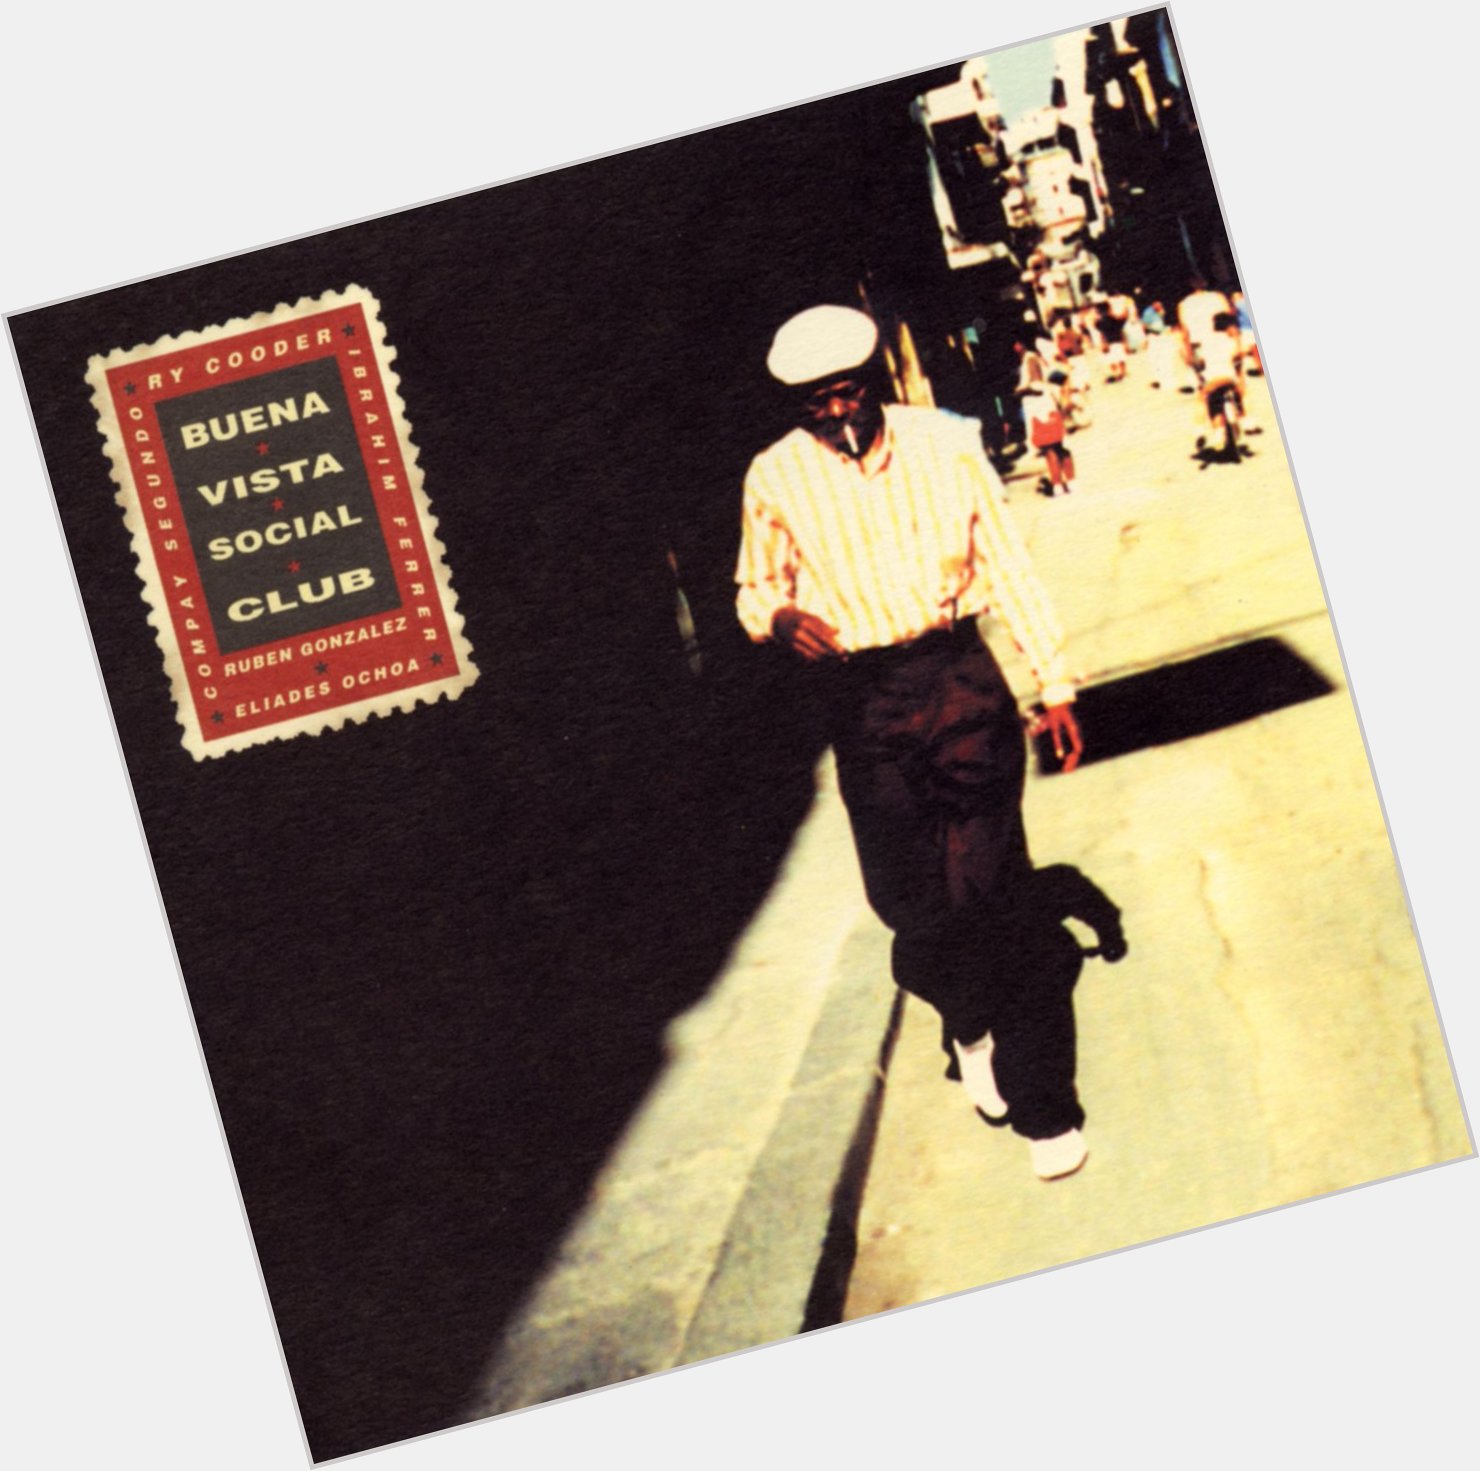 Happy Birthday Ry Cooder ~*~

Thank you for blessing the world !

Art: Buena Vista Social Club, 1997 